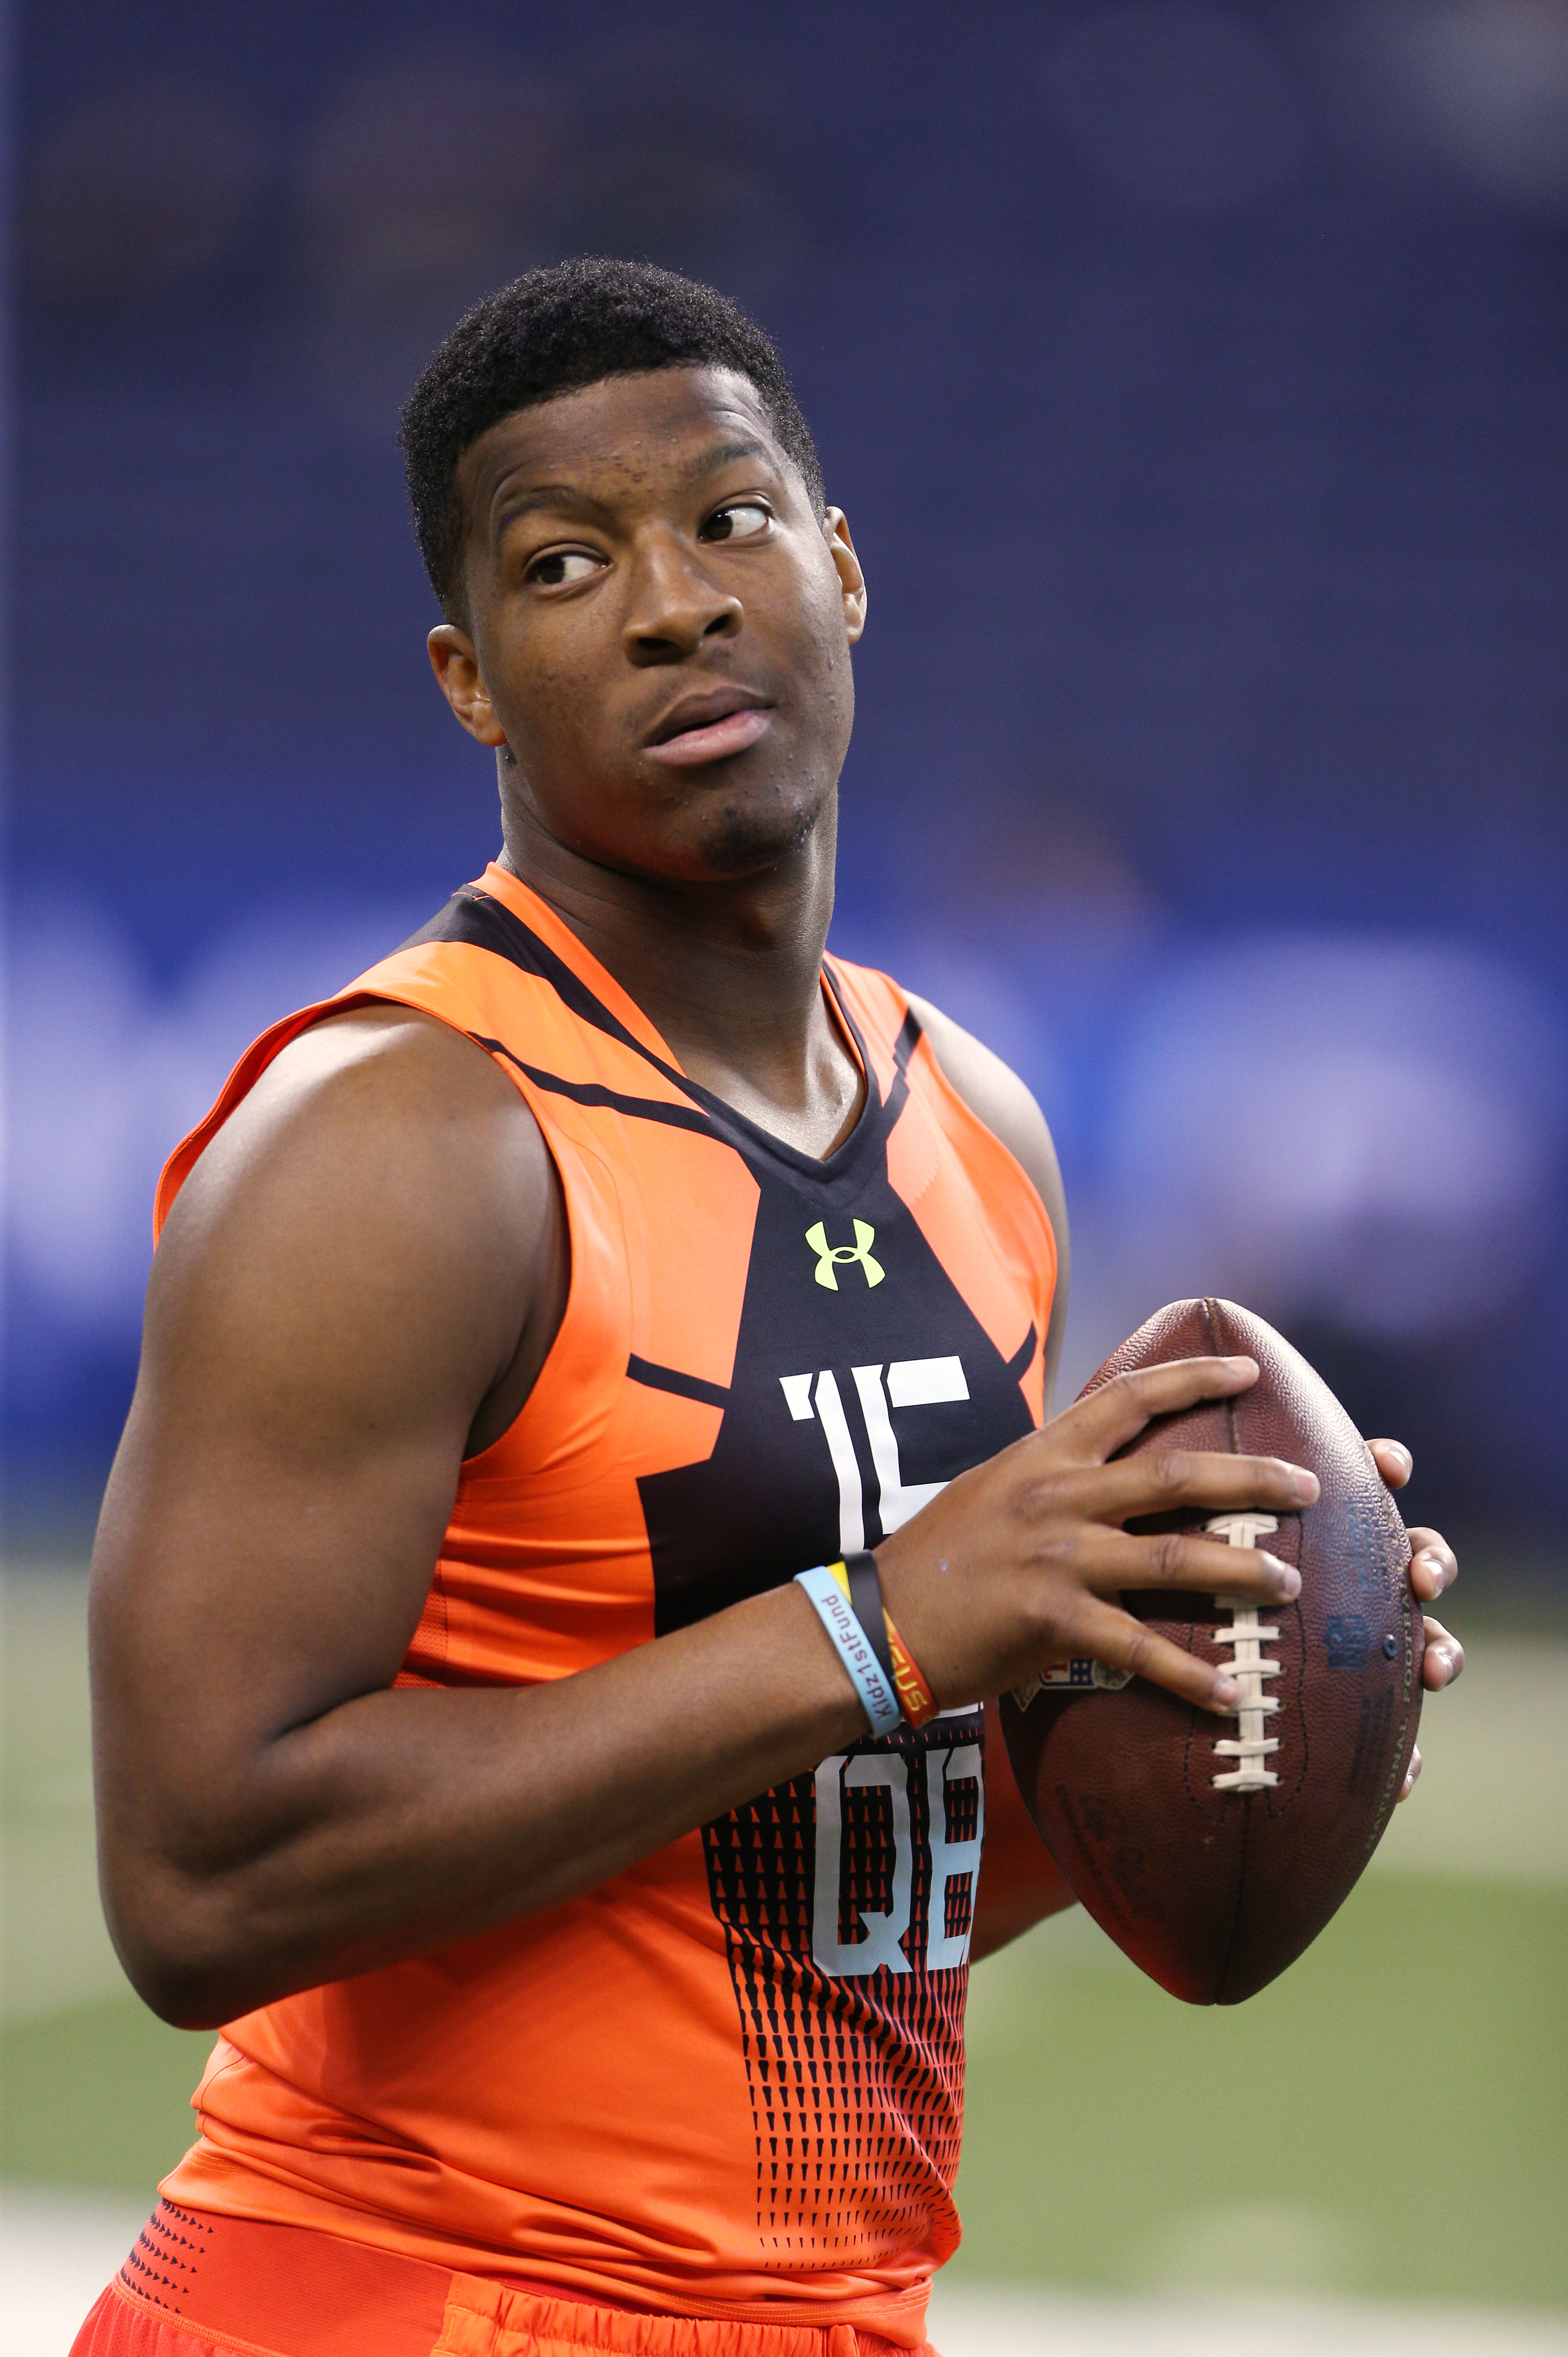 Feb 21, 2015; Indianapolis, IN, USA; Florida State Seminoles quarterback Jameis Winston throws a pass during the 2015 NFL Combine at Lucas Oil Stadium. (Brian Spurlock-USA TODAY Sports)